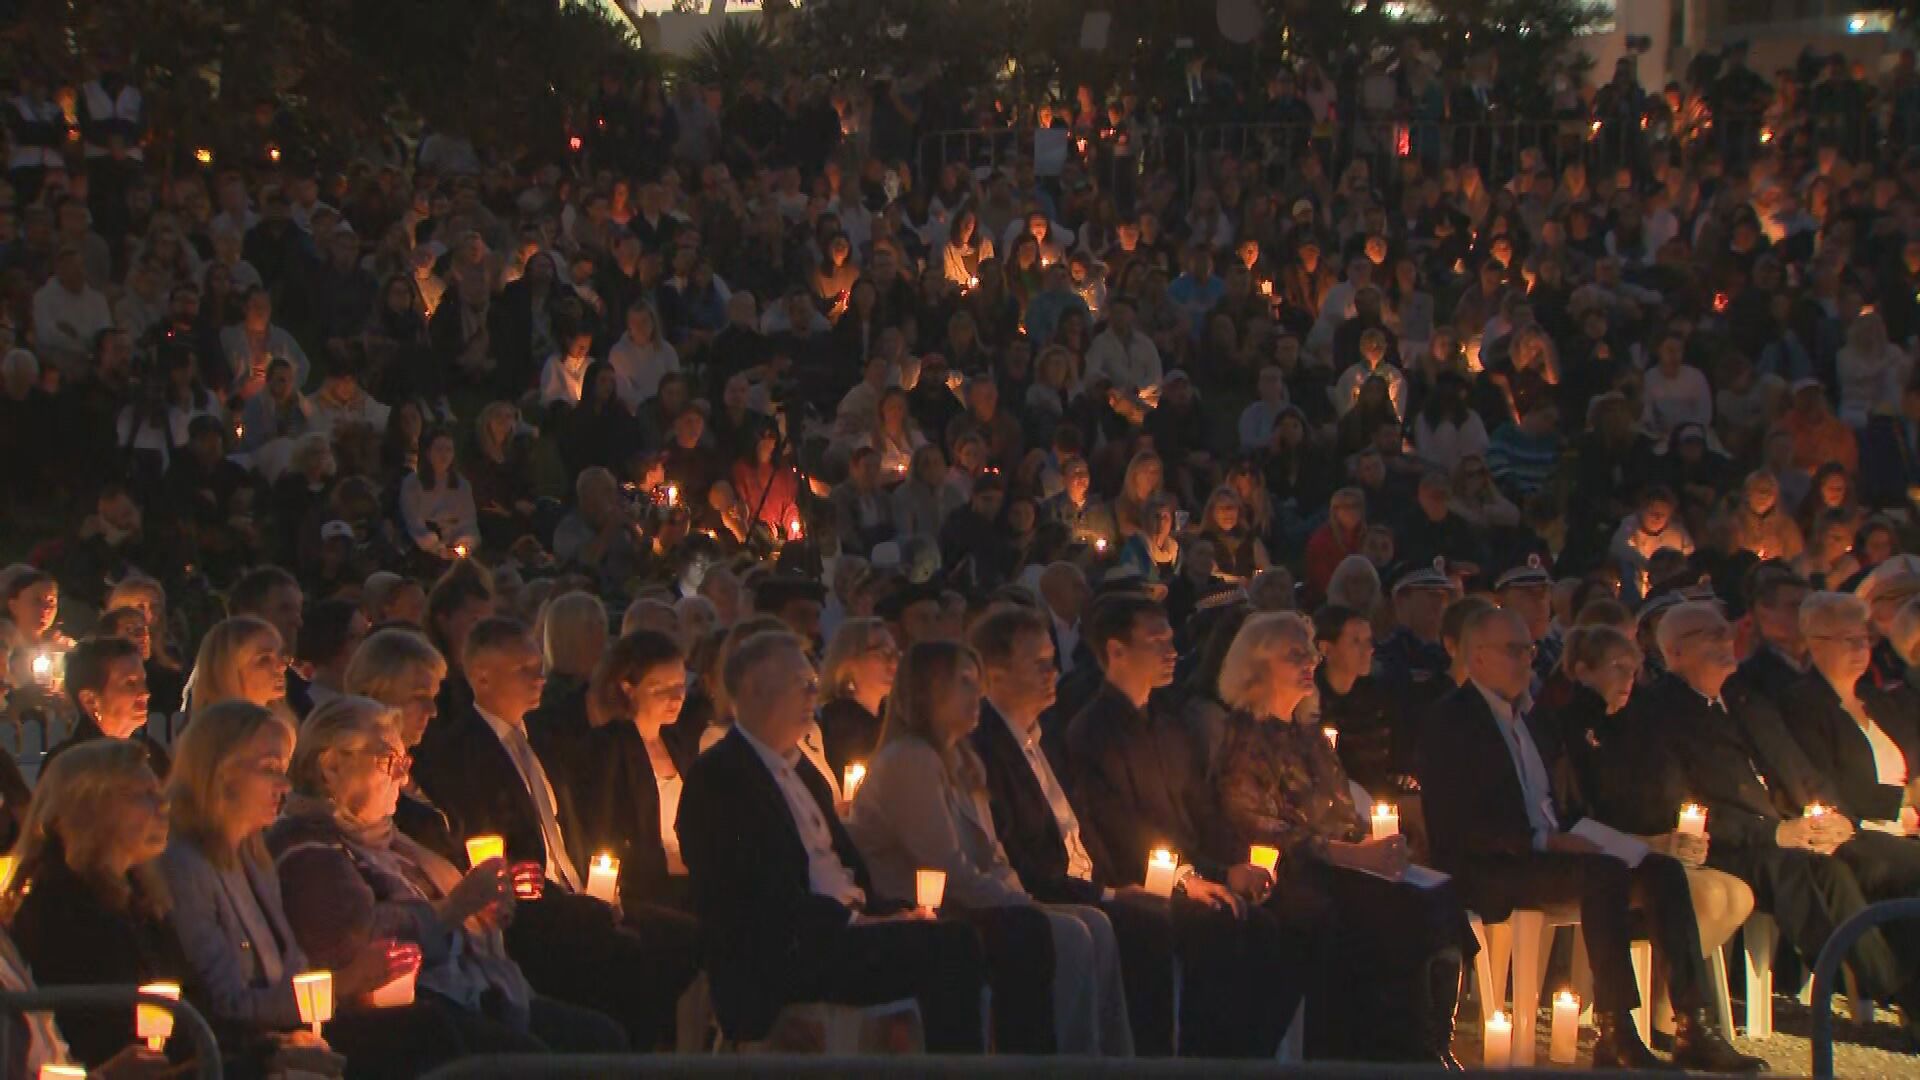 Bondi Beach has fallen silent this evening as thousands gathered for a candlelight vigil.